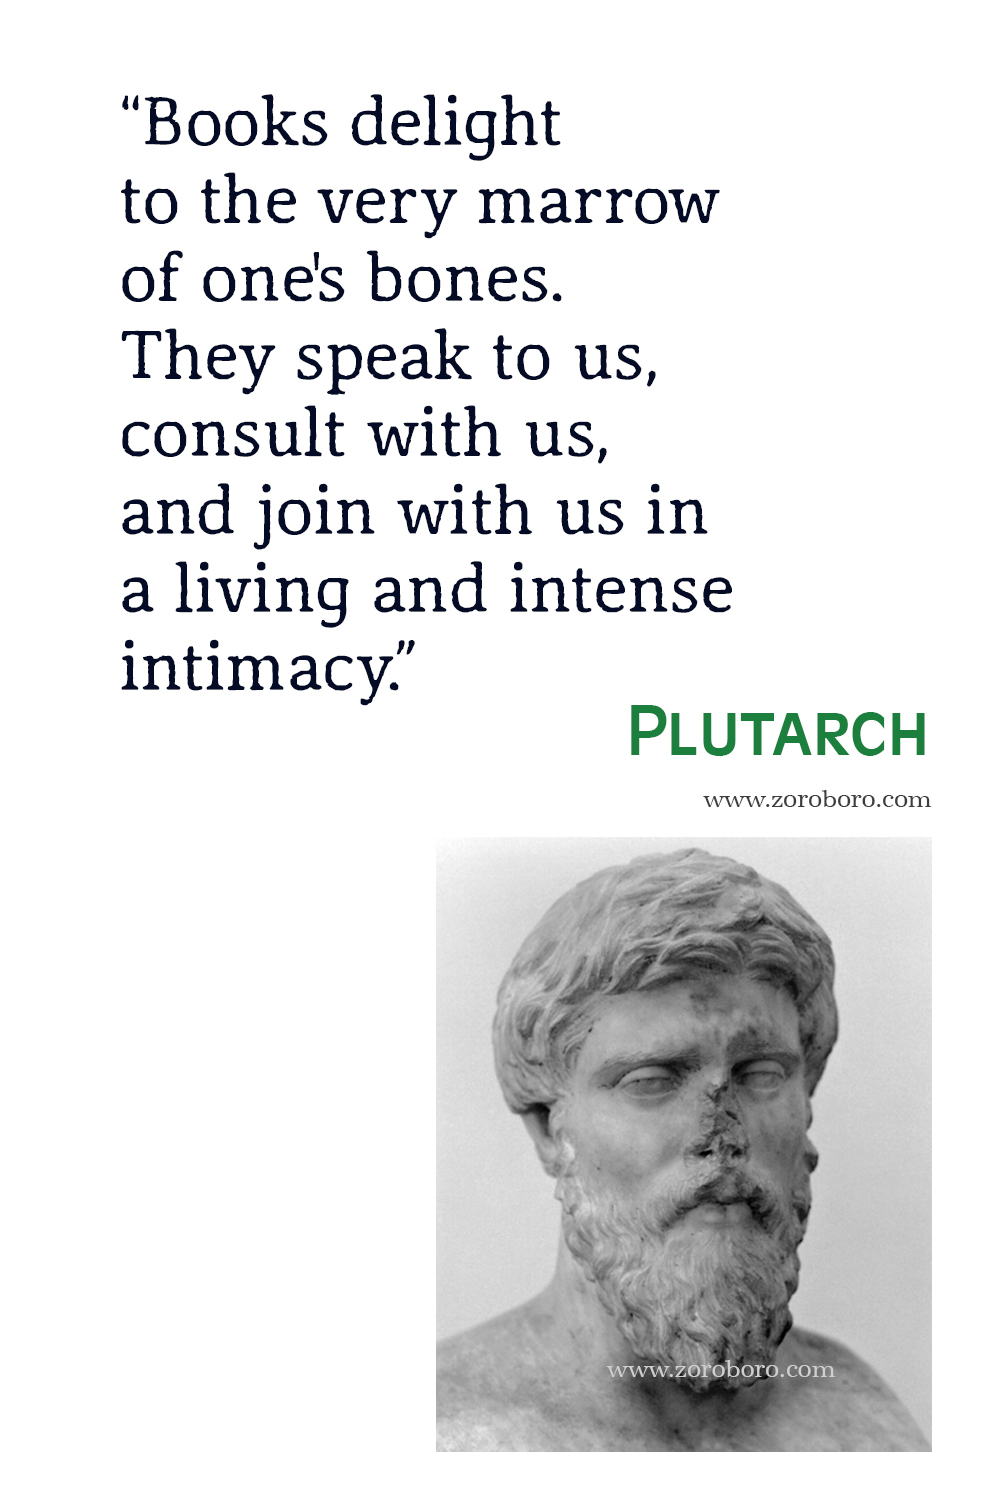 Plutarch Quotes, Plutarch Philosophy, Plutarch, Plutarch Photo, Plutarch Images, Plutarch Books Quotes. Plutarch Moralia, Parallel Lives Book by Plutarch Quotes.